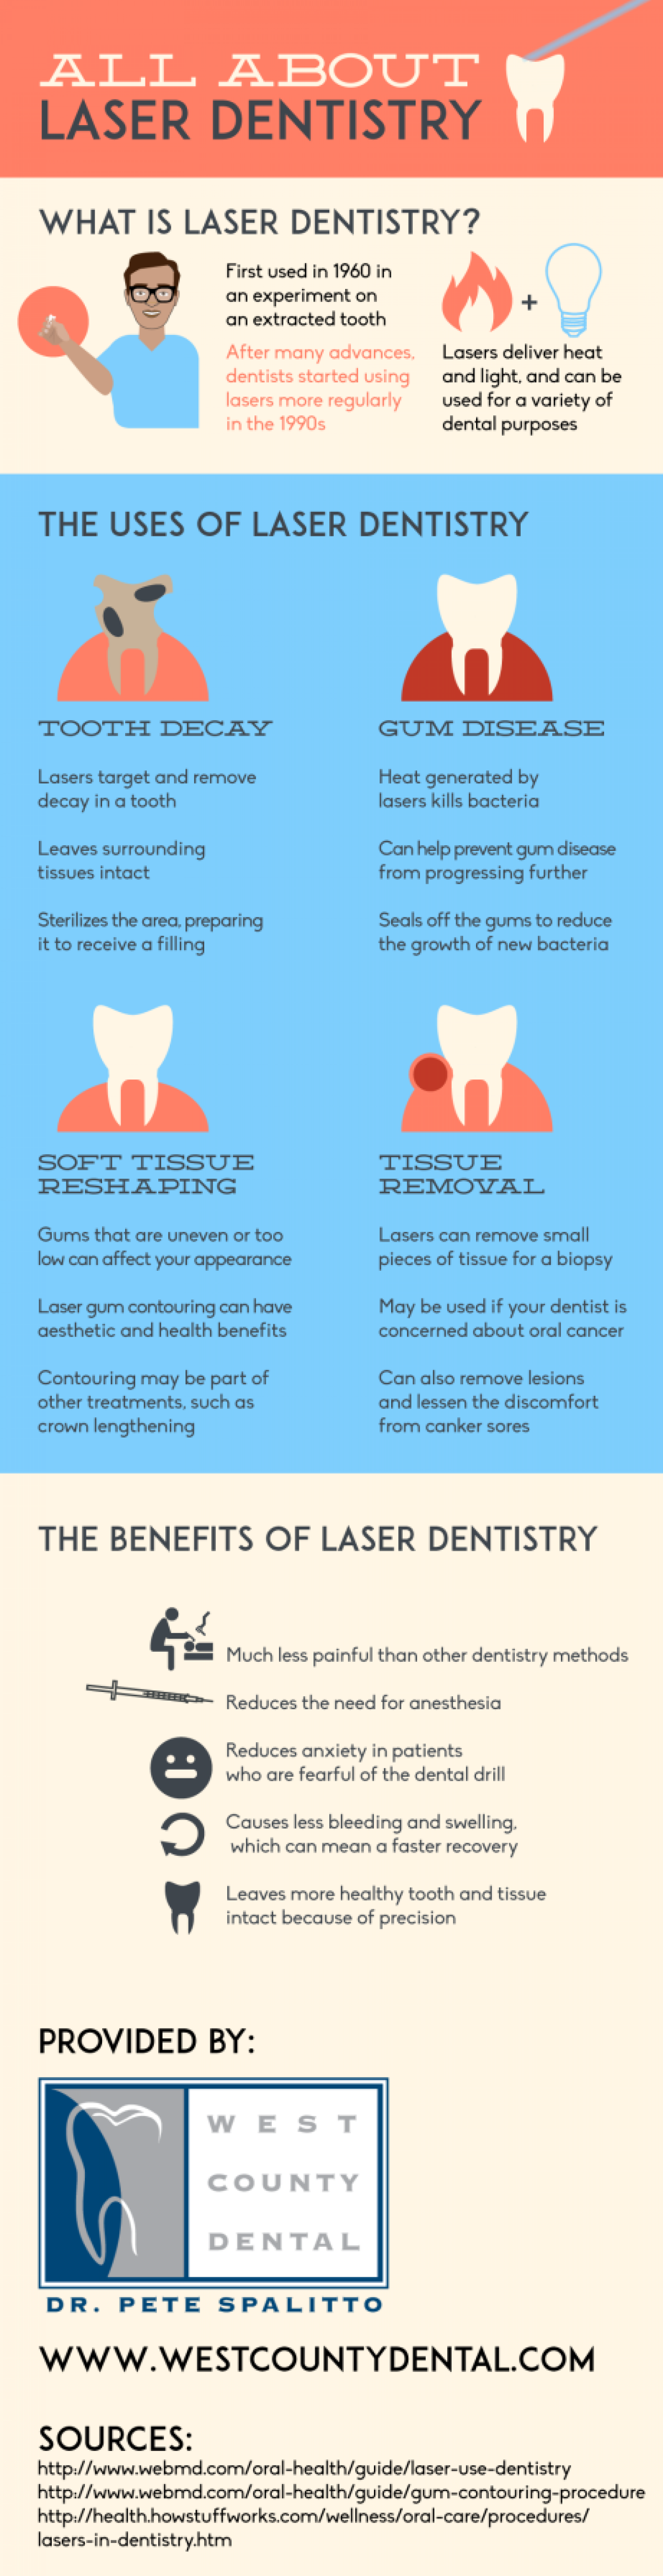 All About Laser Dentistry Infographic